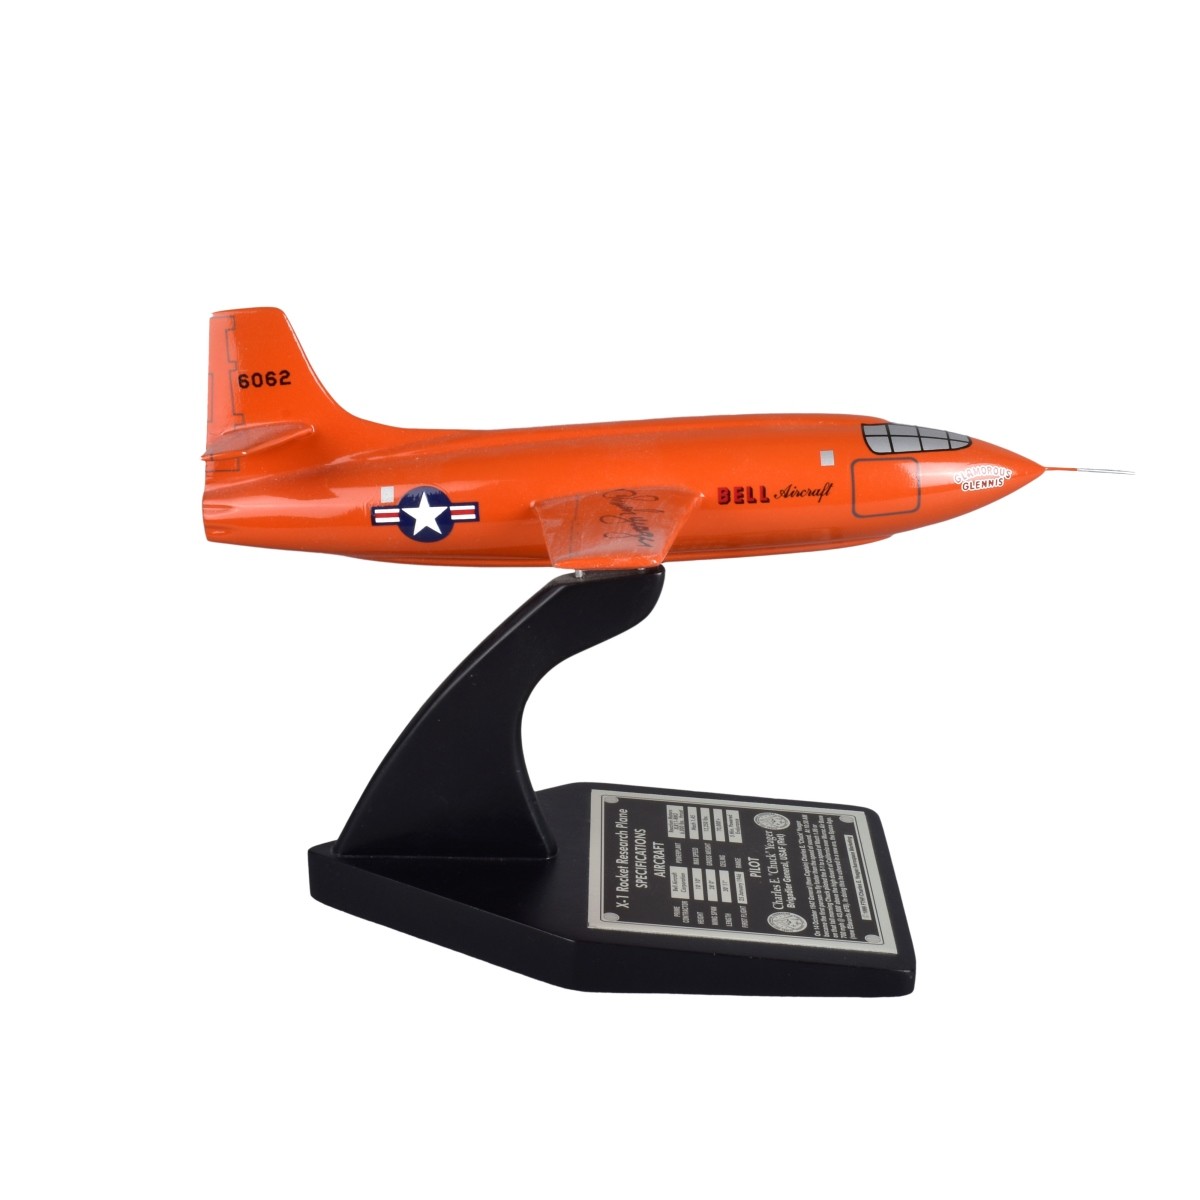 Chuck Yeager Signed Bell X-1 Rocket Plane Model